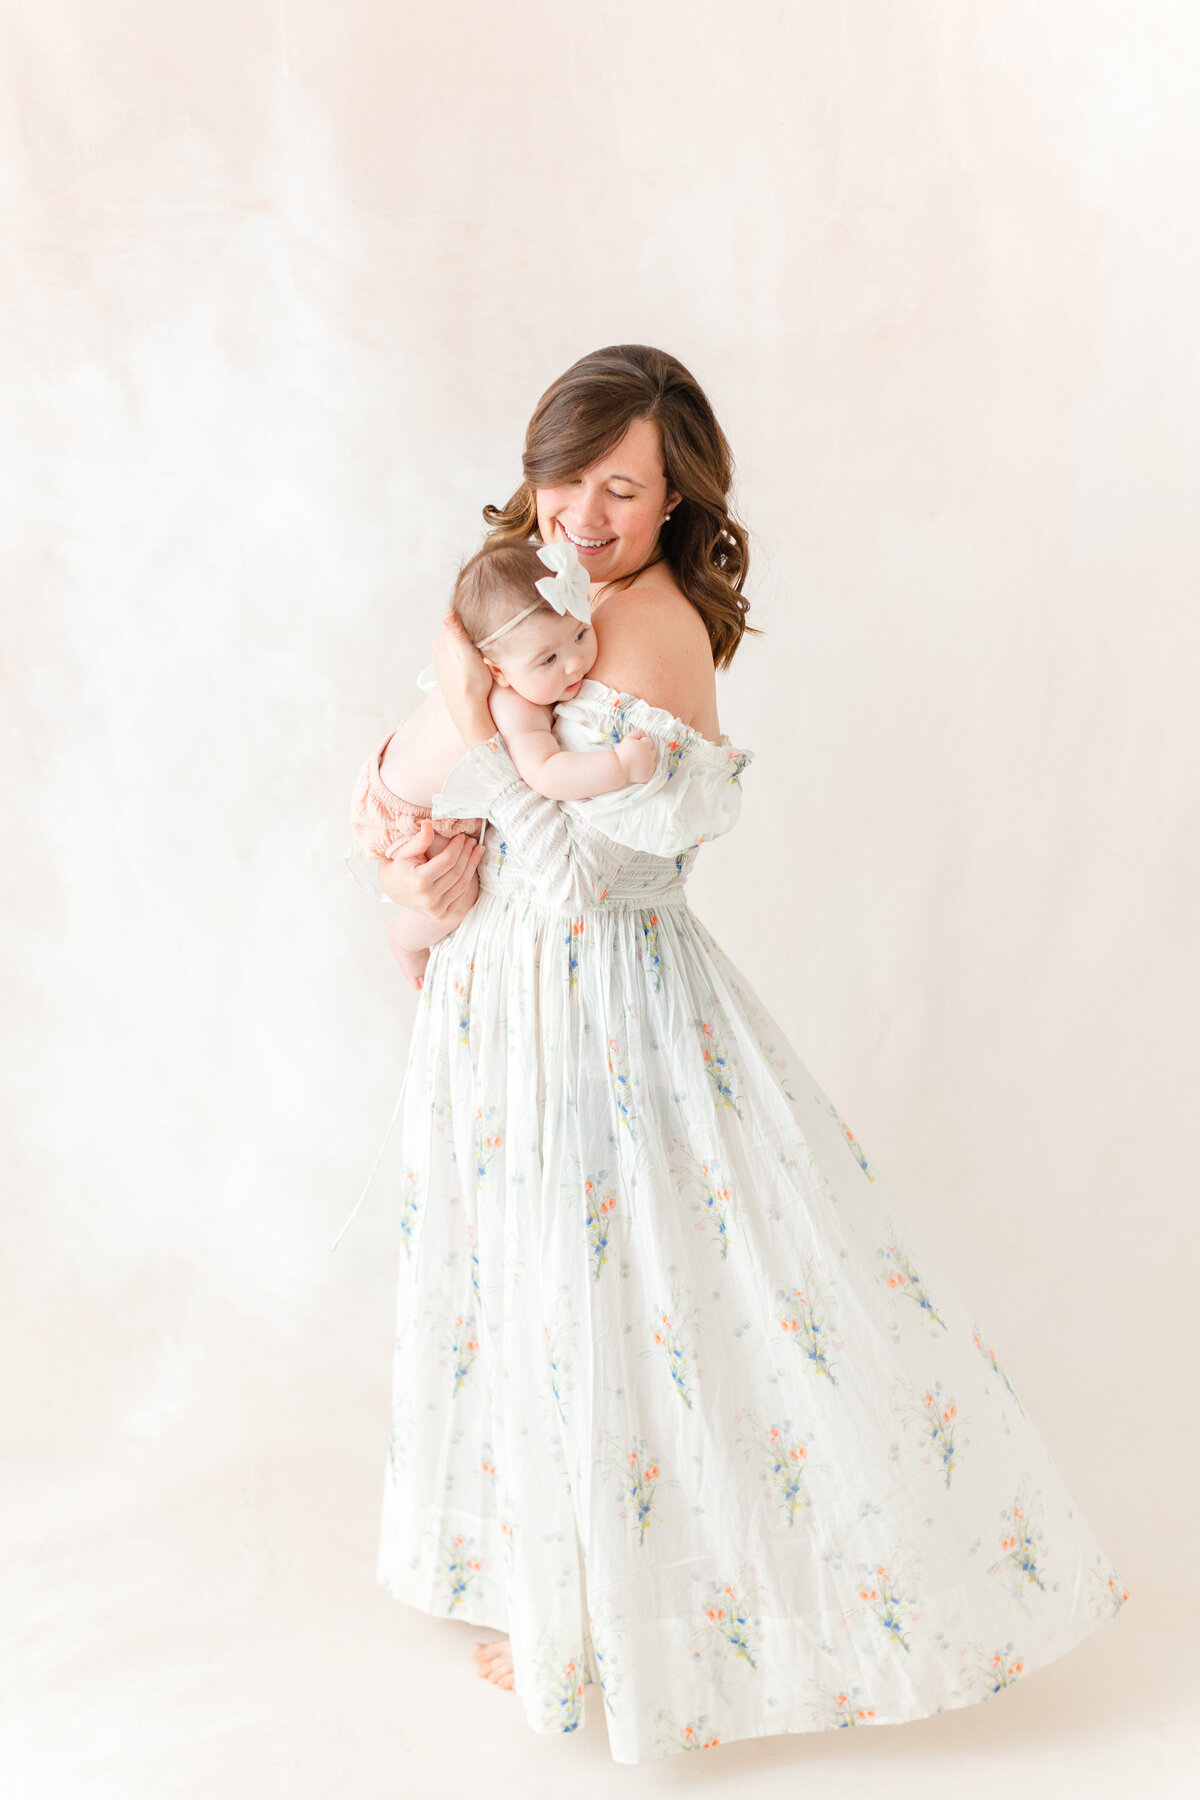 A Baby Photography photo in Northern Virginia of a mama twirling in a white floral dress while holding her baby girl